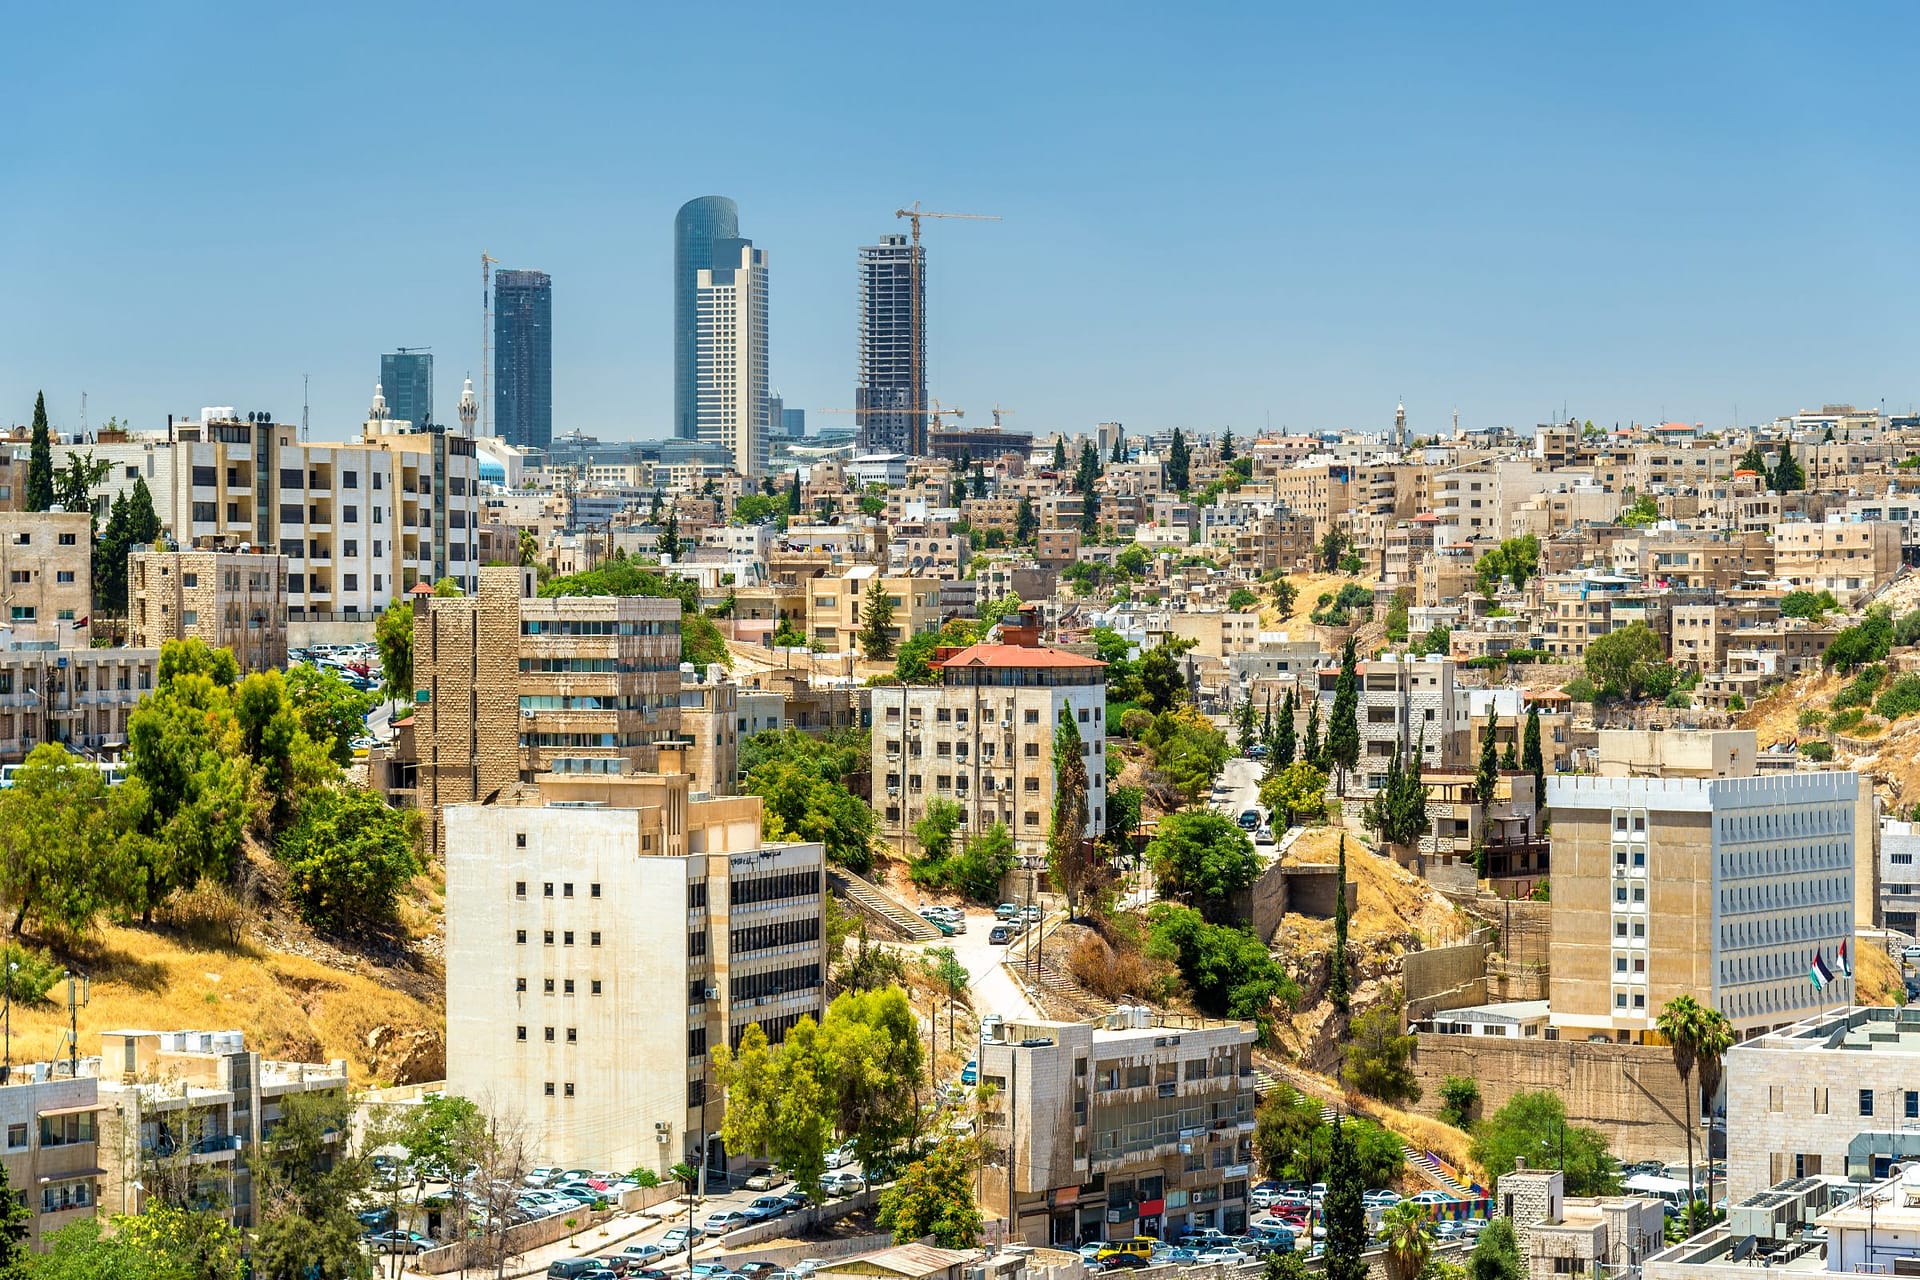 Cityscape of Amman downtown with skyscrapers at background - Jordan